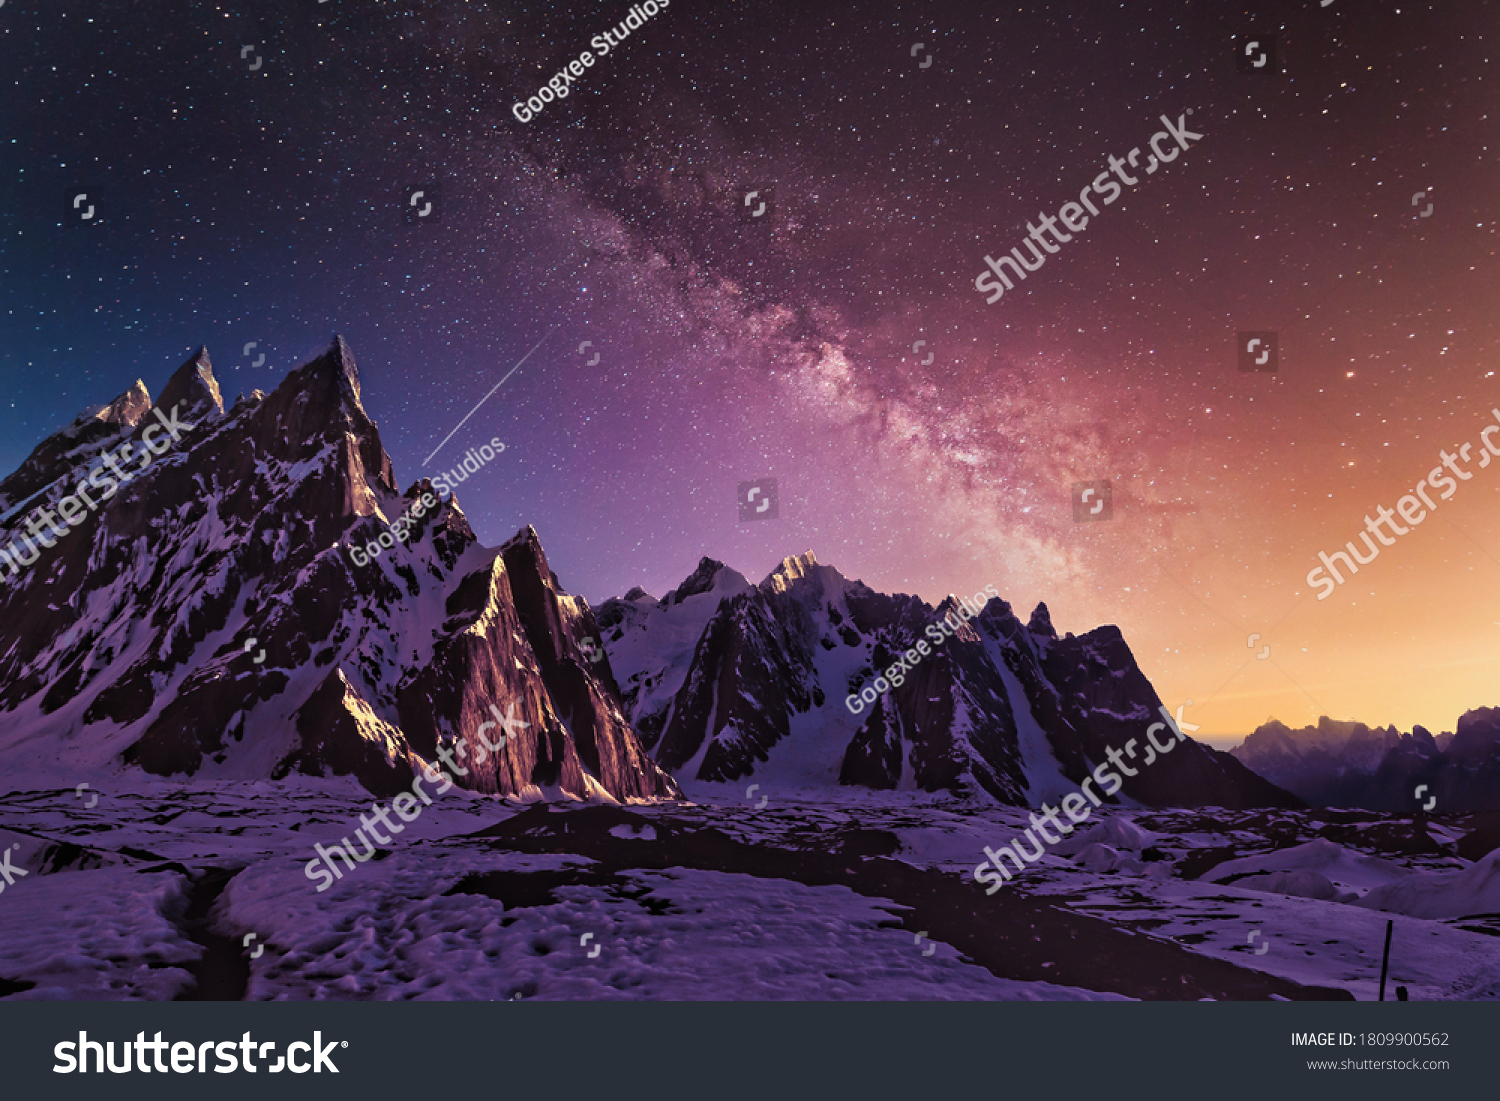 Snow mountains with dramatic starry evening galaxy Beautiful HD wallpaper #1809900562